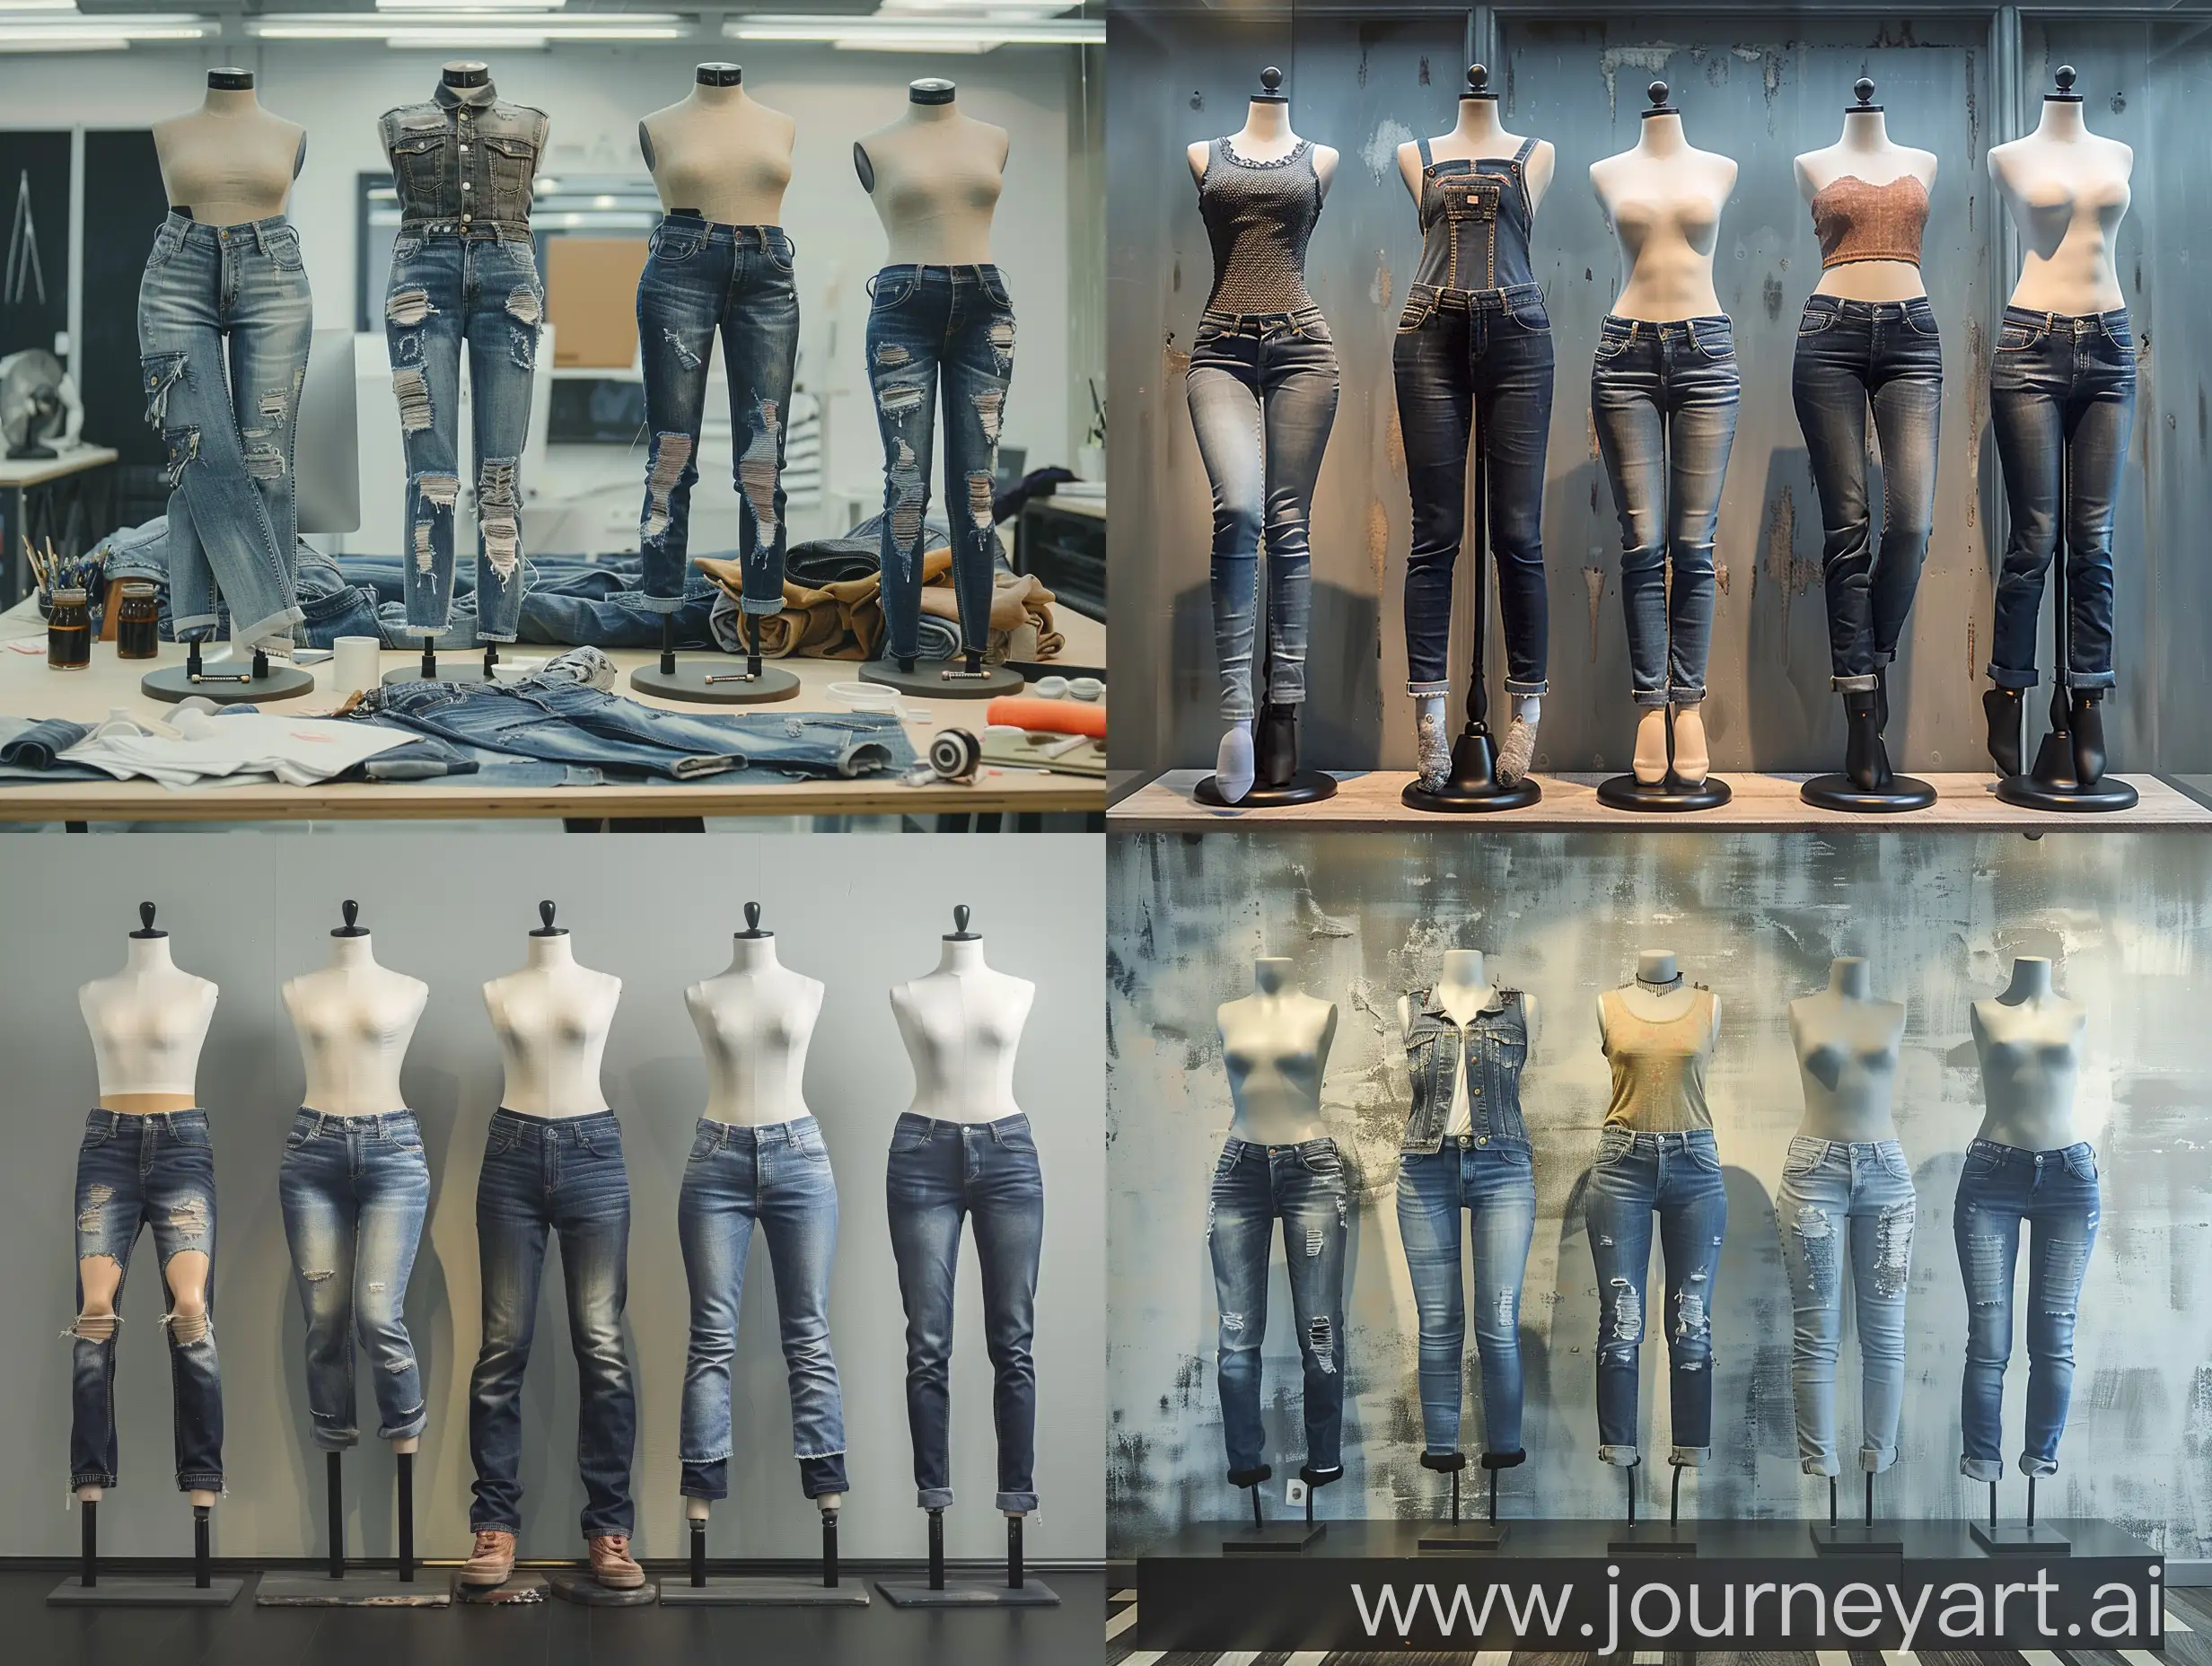 Mannequins-Displaying-Various-Styles-of-Denim-Jeans